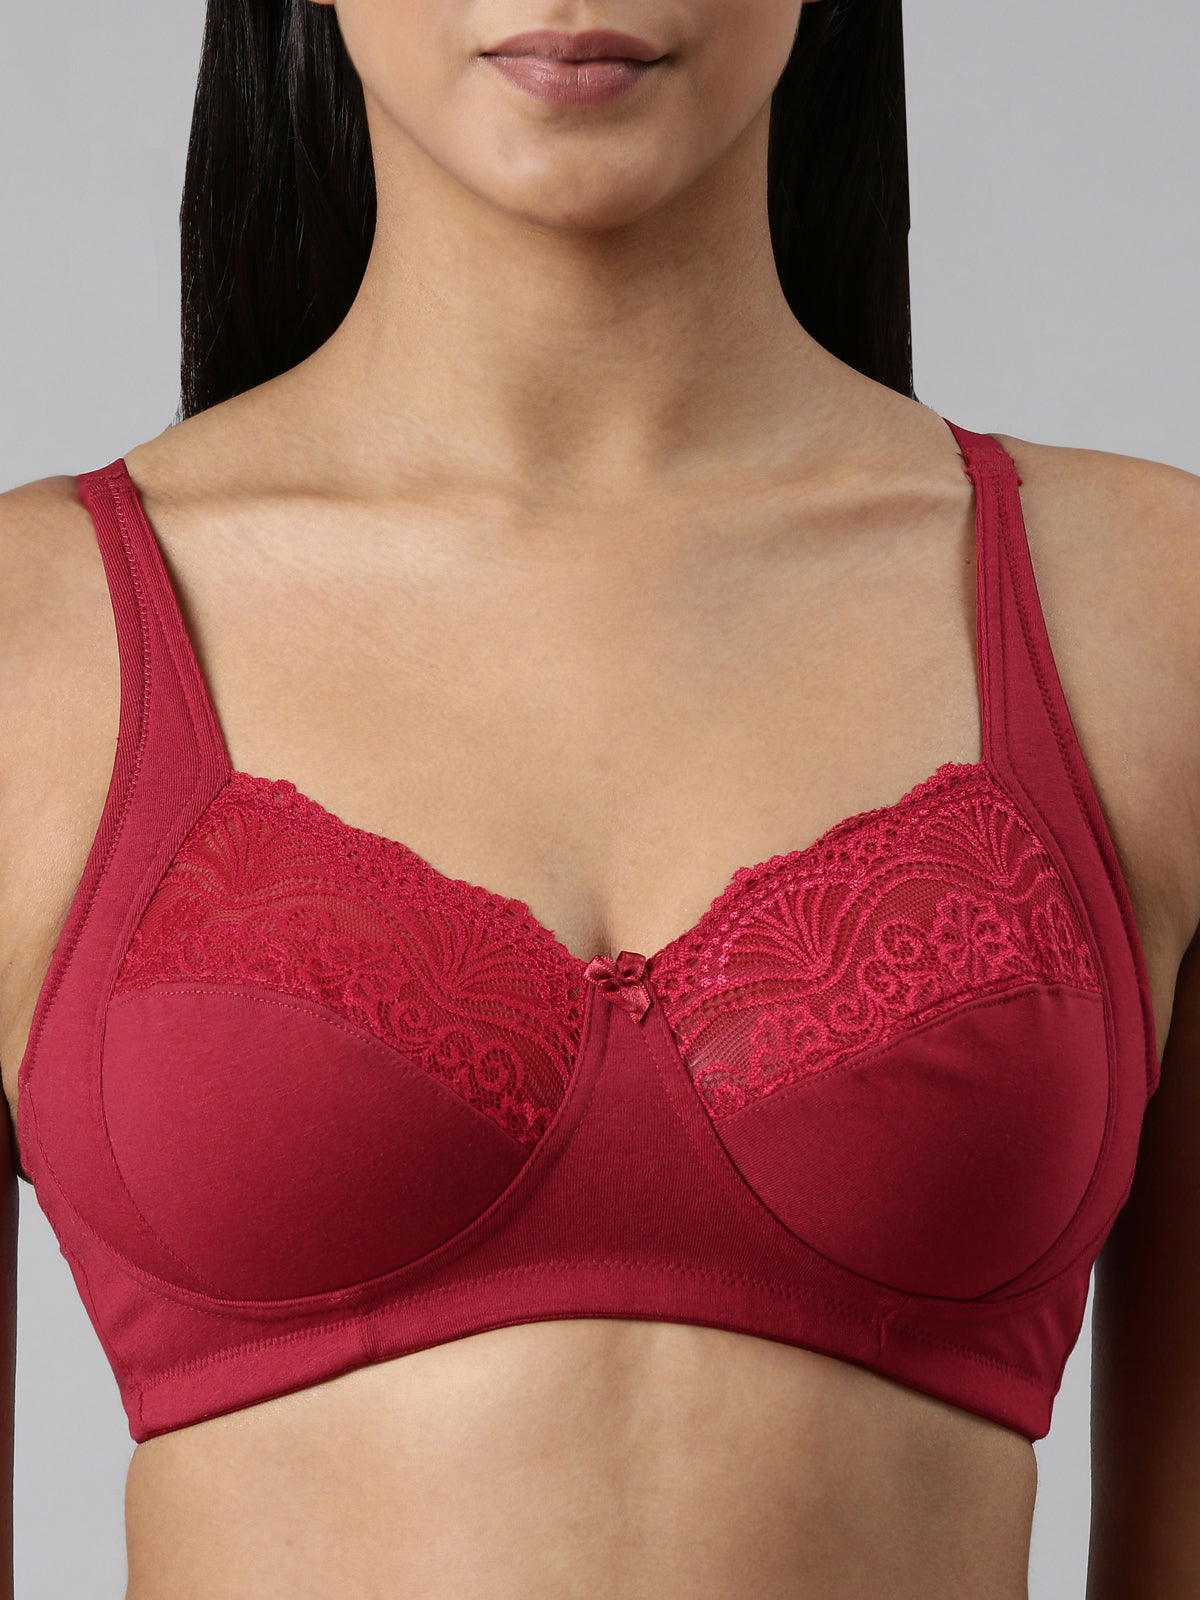 blossom-embrace-red wine1-support bra